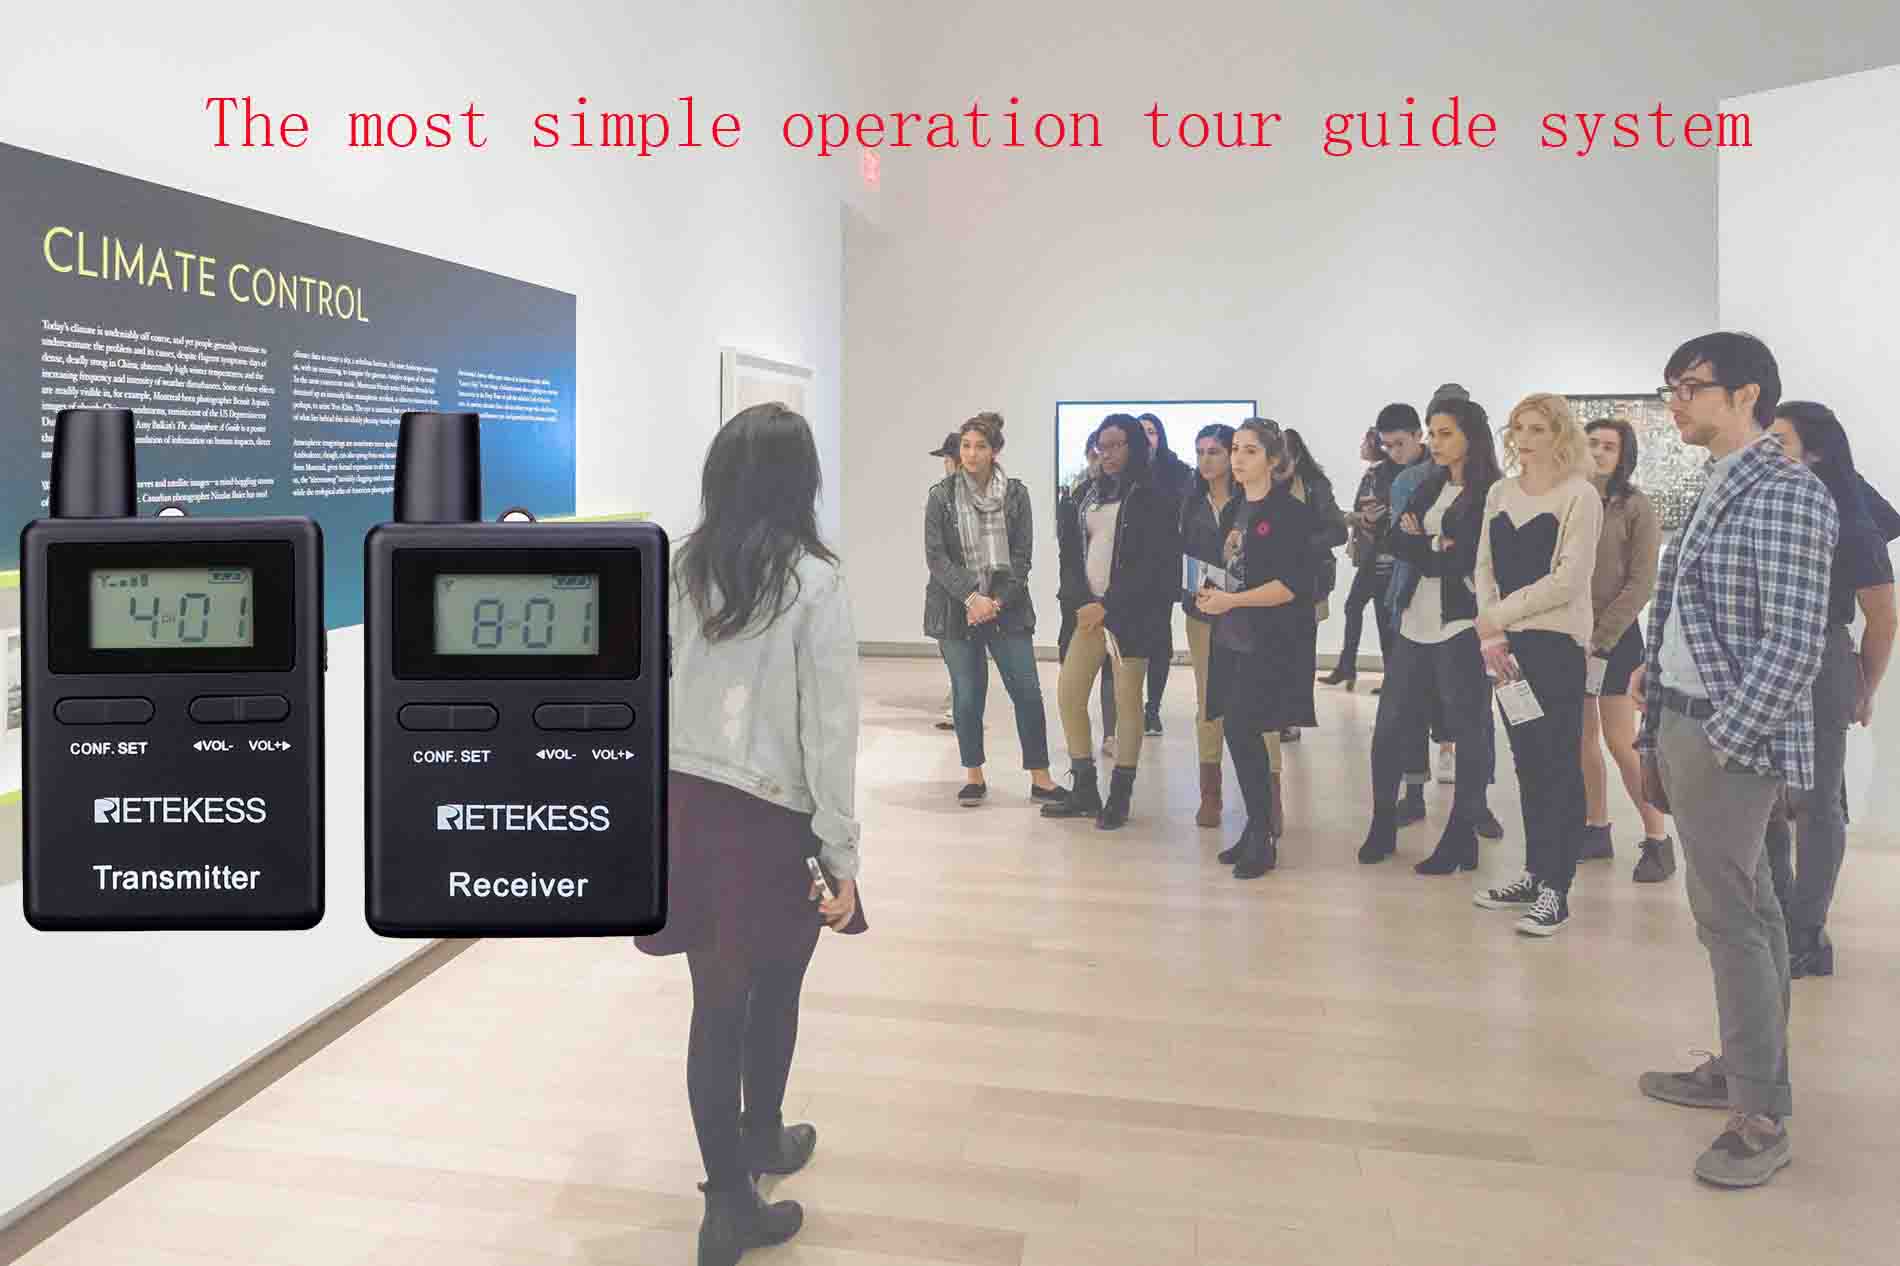 Which model is the simplest operate tour guide system of Retekess？